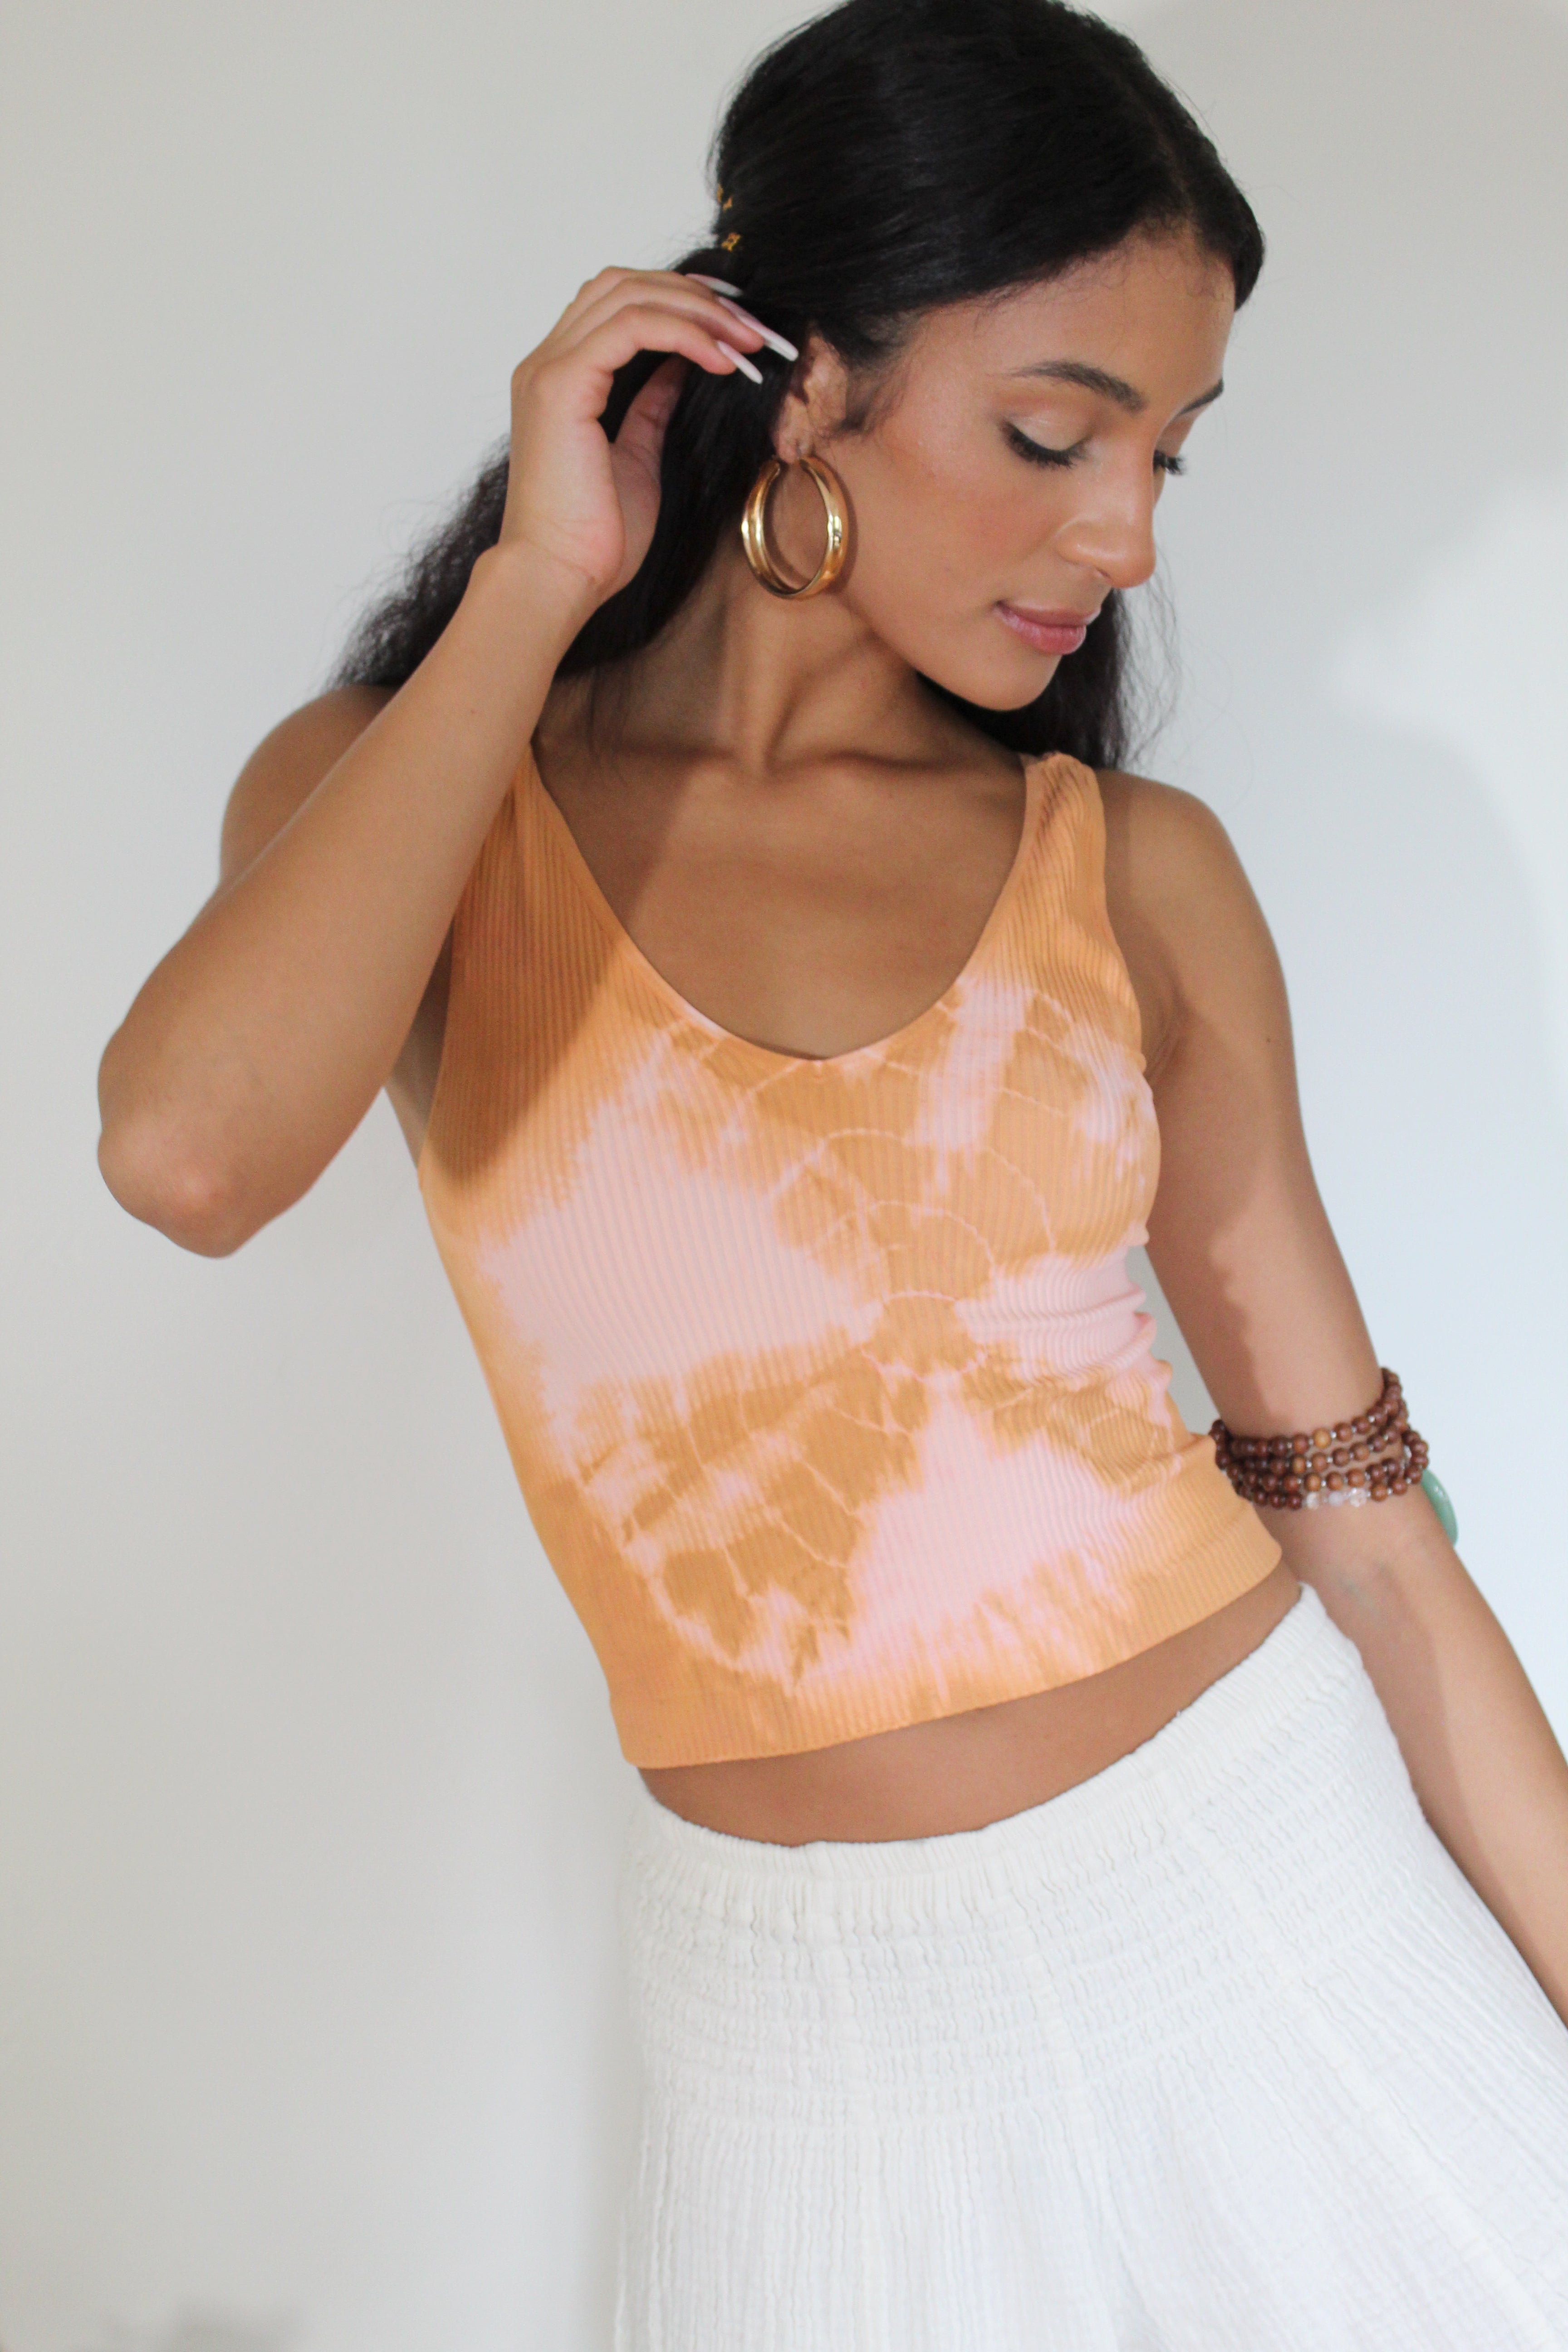 Rust Chakra Tie Dye Crop Top - Yoga Clothing by Daughters of Culture